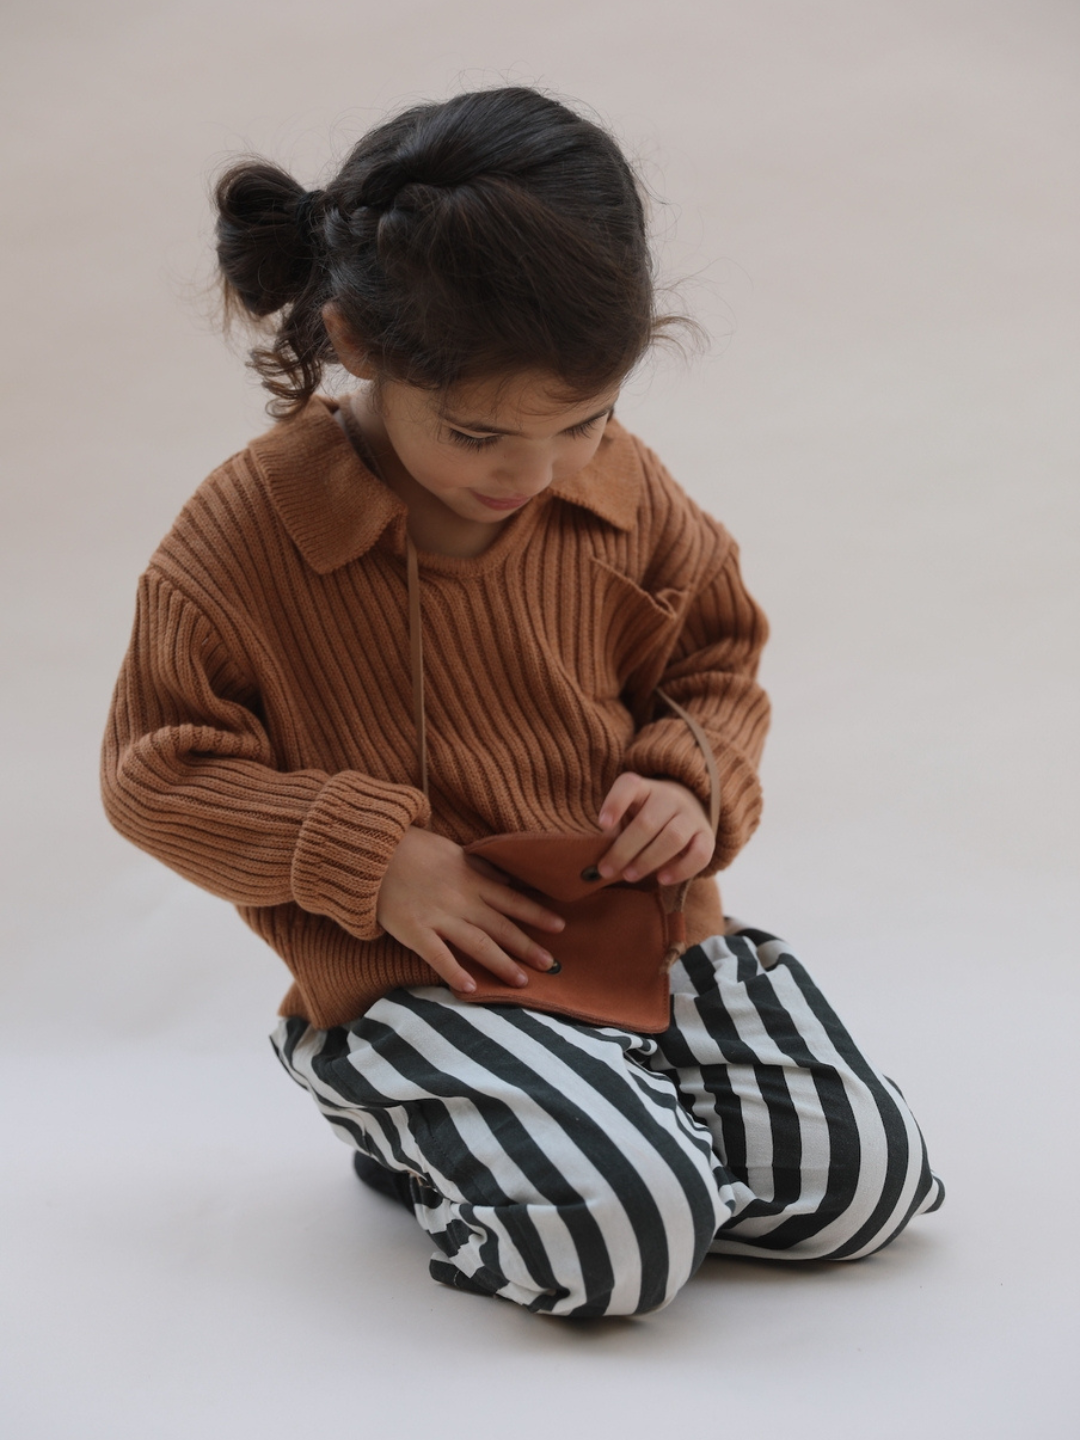 Black | A child is wearing the black striped pant